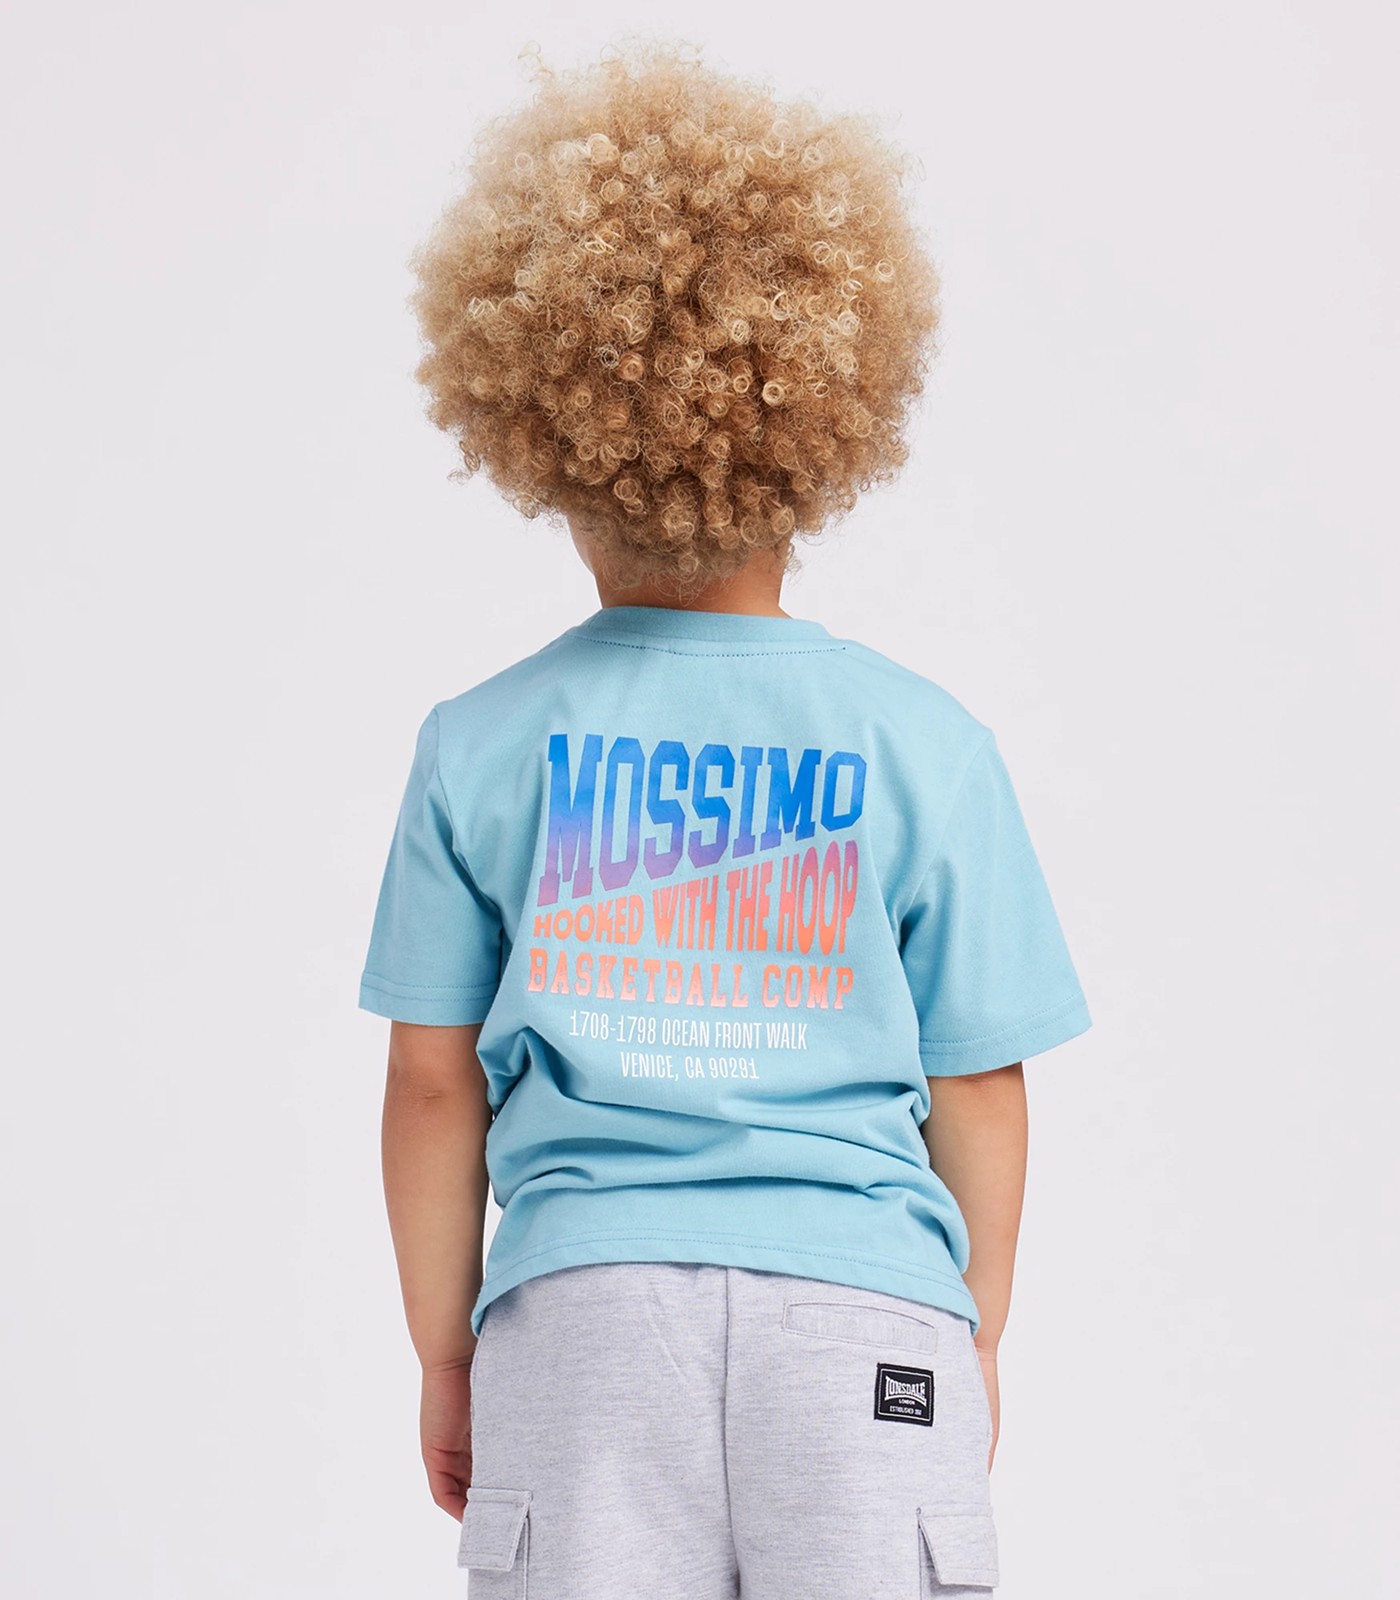 Mossimo T-Shirt for Kids UNISEX